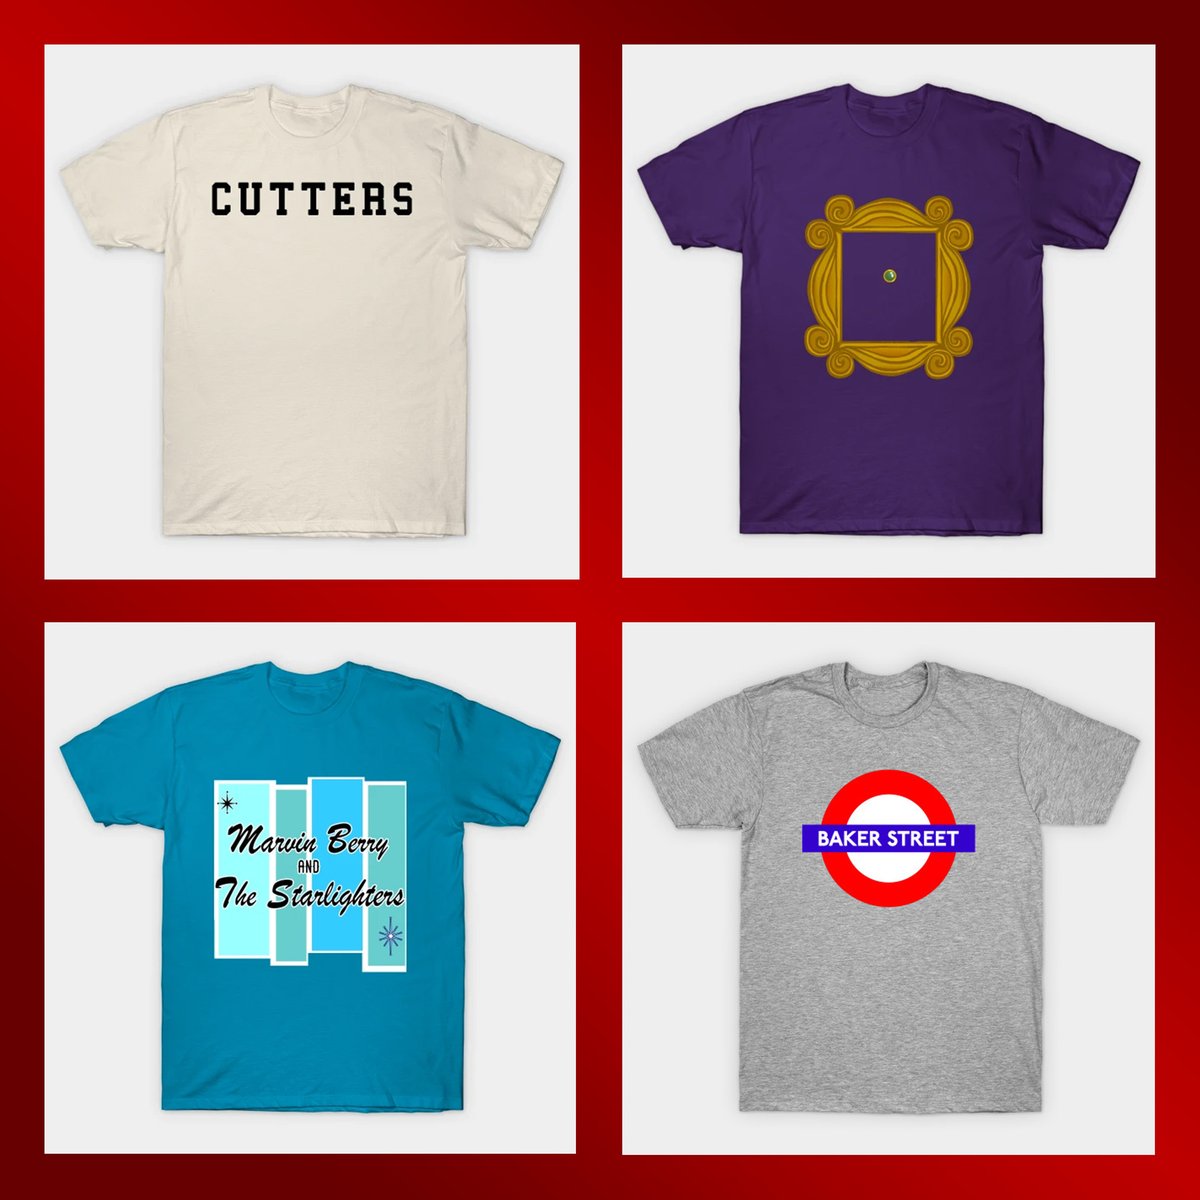 We're A Mom+Pop Graphic Design Shop That Sure Could Use Your Support! #SmallBusiness #ShopSmall #Cutters #BreakingAway #Friends #NewYorkCity #MarvinBerry #BackToTheFuture #BakerStreet #Sherlock teepublic.com/user/vandalay-…